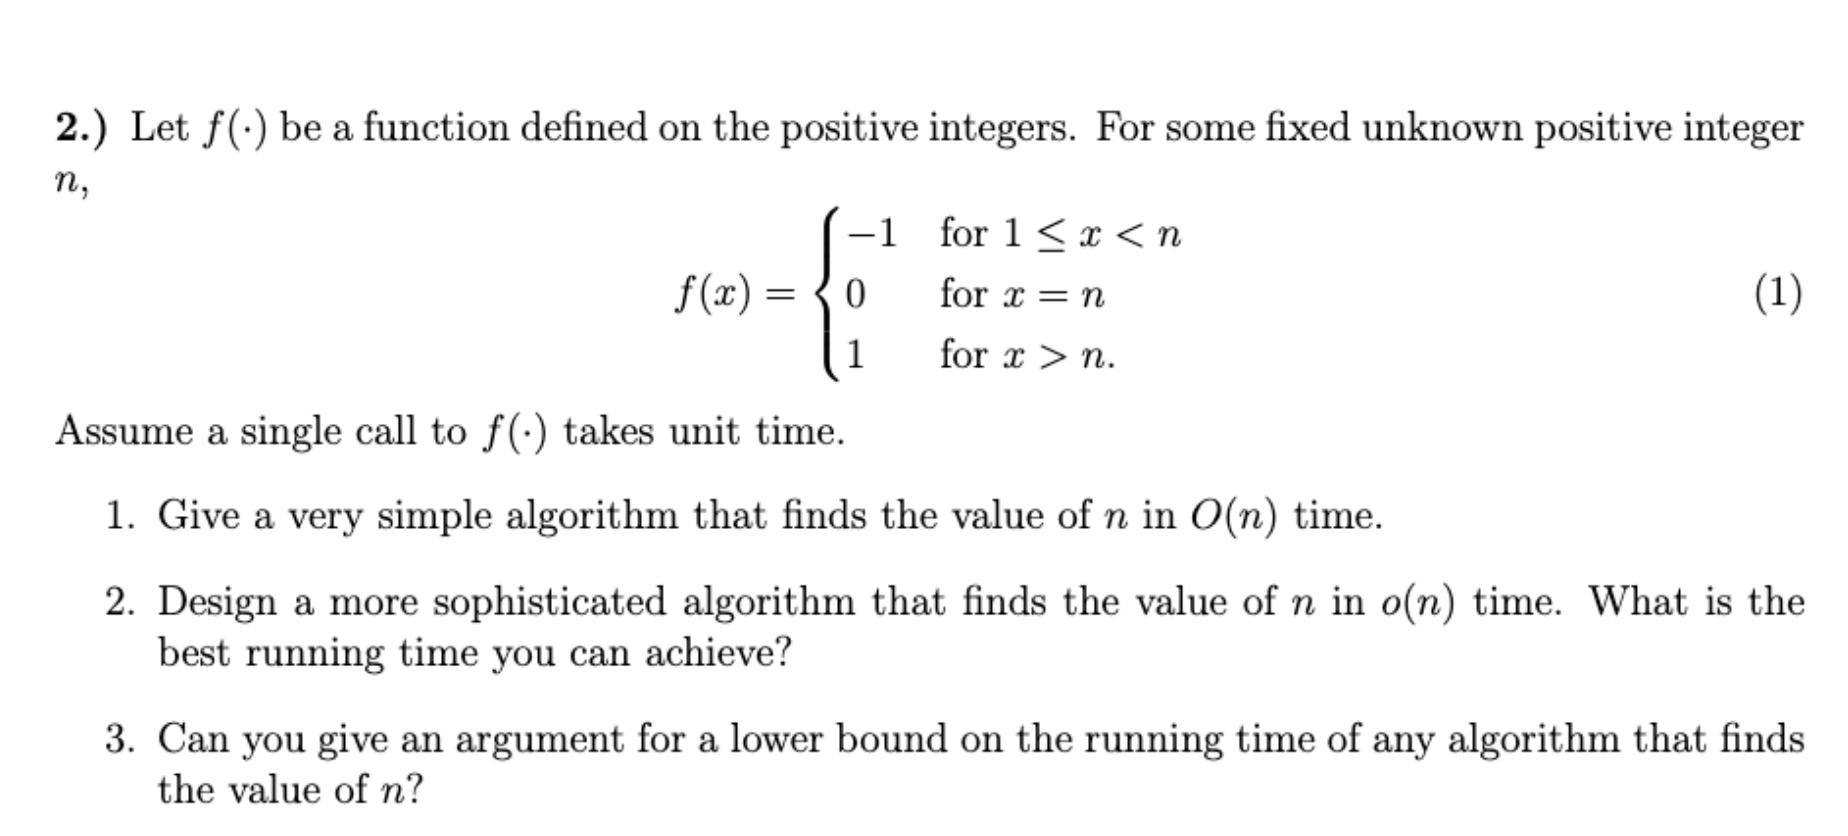 2.) Let f() be a function defined on the positive integers. For some fixed unknown positive integer n, f(x)=